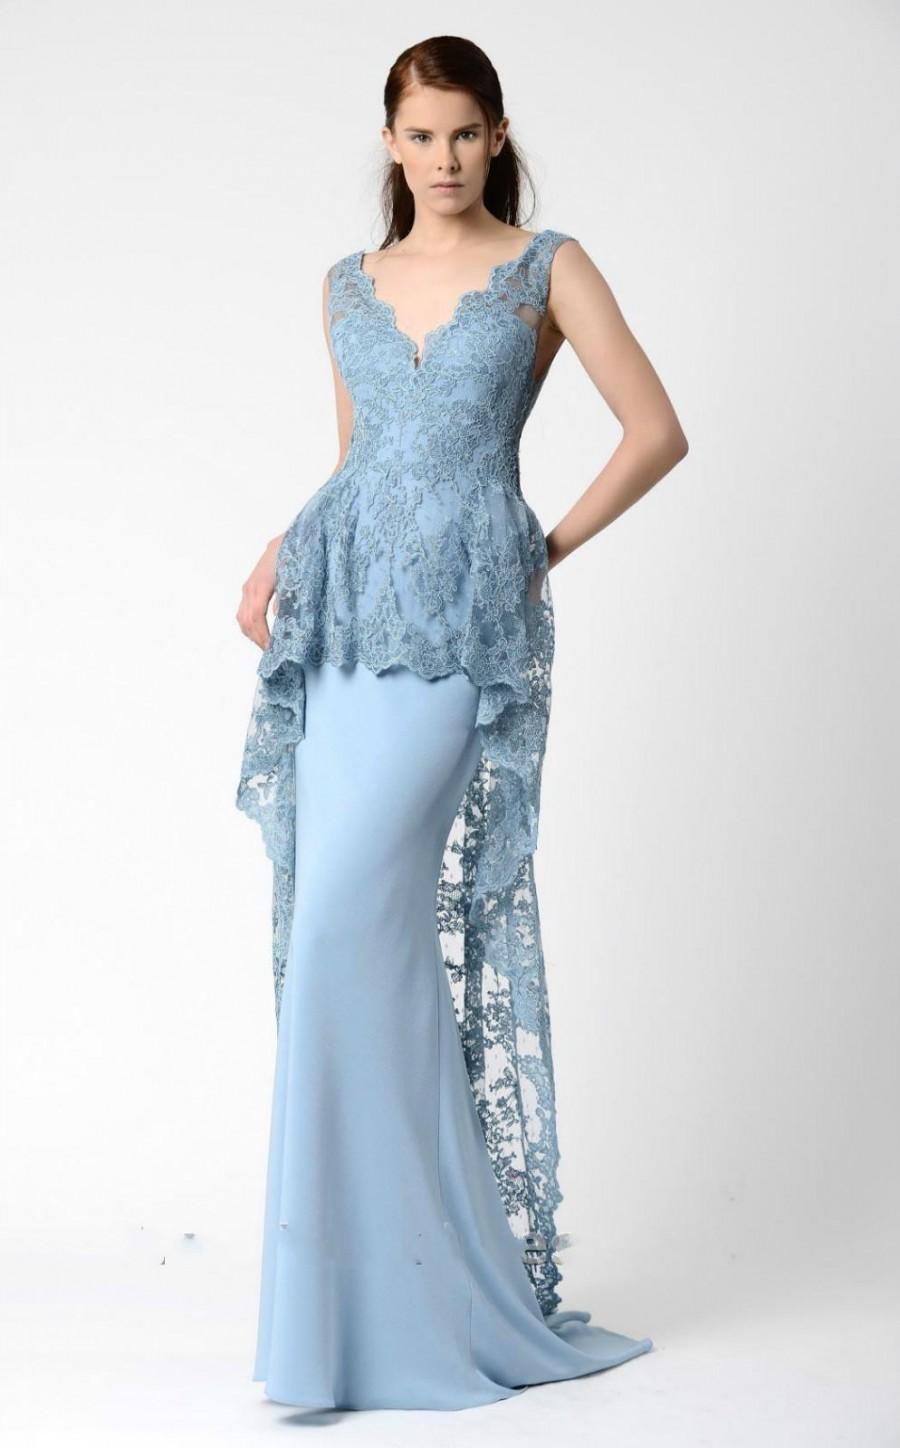 Hochzeit - 2016 Mermaid Evening Dresses Gowns Formal Prom With V Neck Sheer Neckline Sexy Bare Back Appliqued Blue Lace Party Formal Full Length Online with $126.39/Piece on Hjklp88's Store 